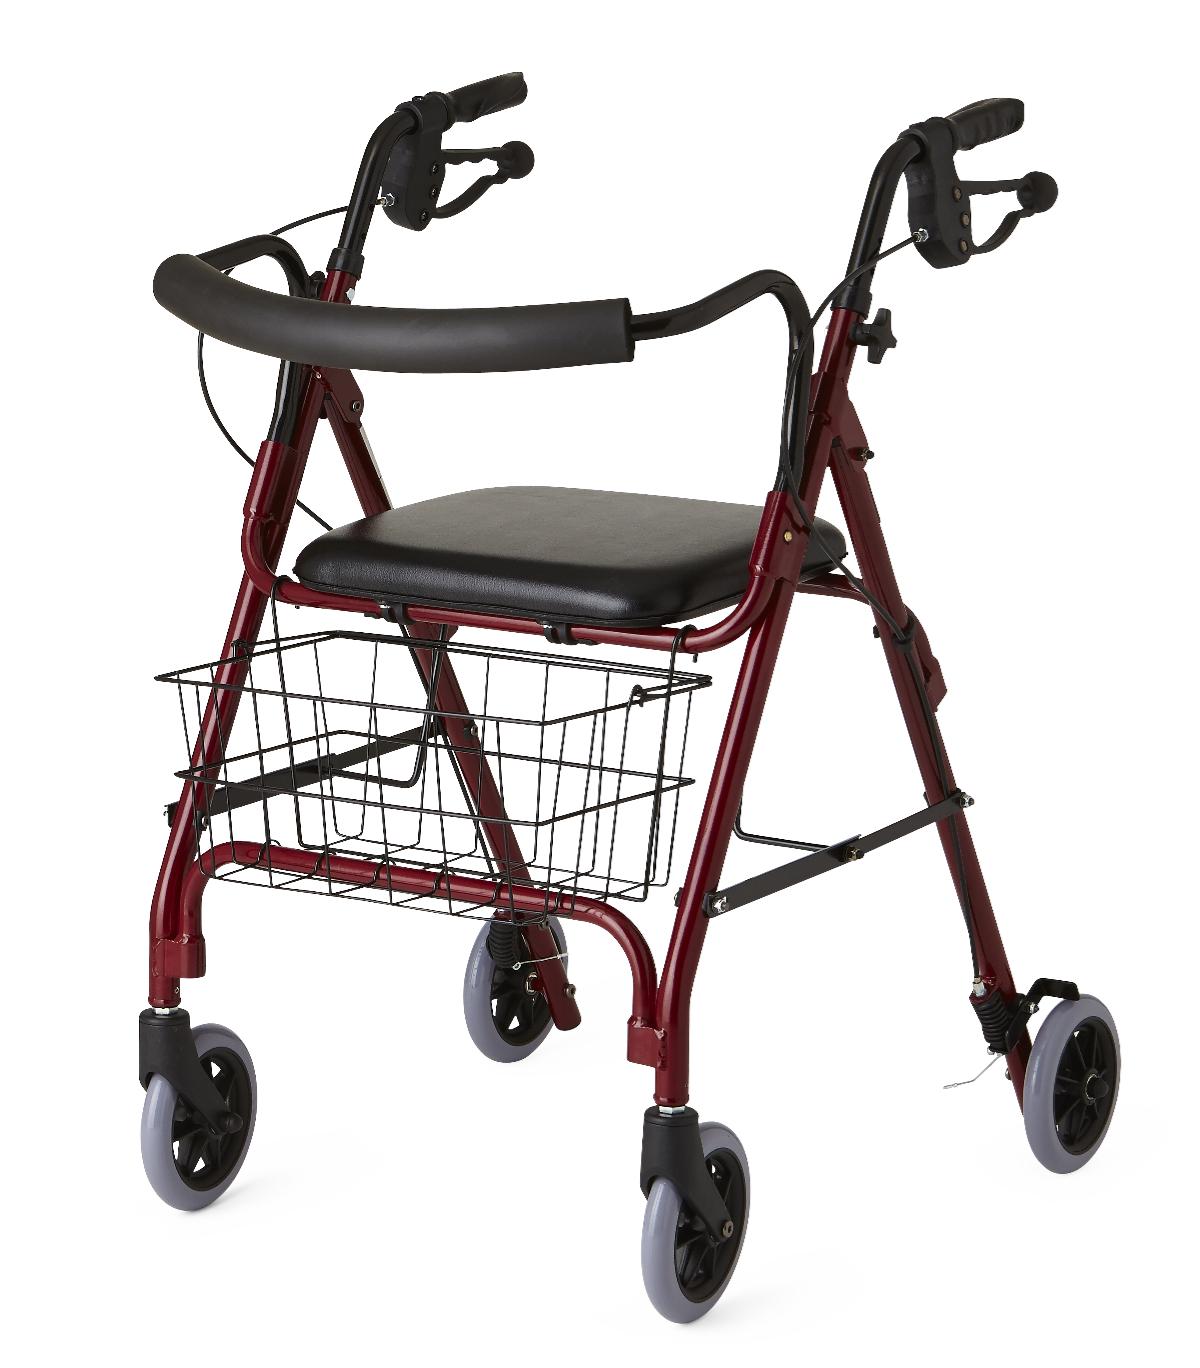 MDL MDS86810 EA/1  MEDLINE DELUXE ROLLATOR, BURGUNDY, CURVED BACK, WEIGHT CAP 250LBS  (NON-RETURNABLE)